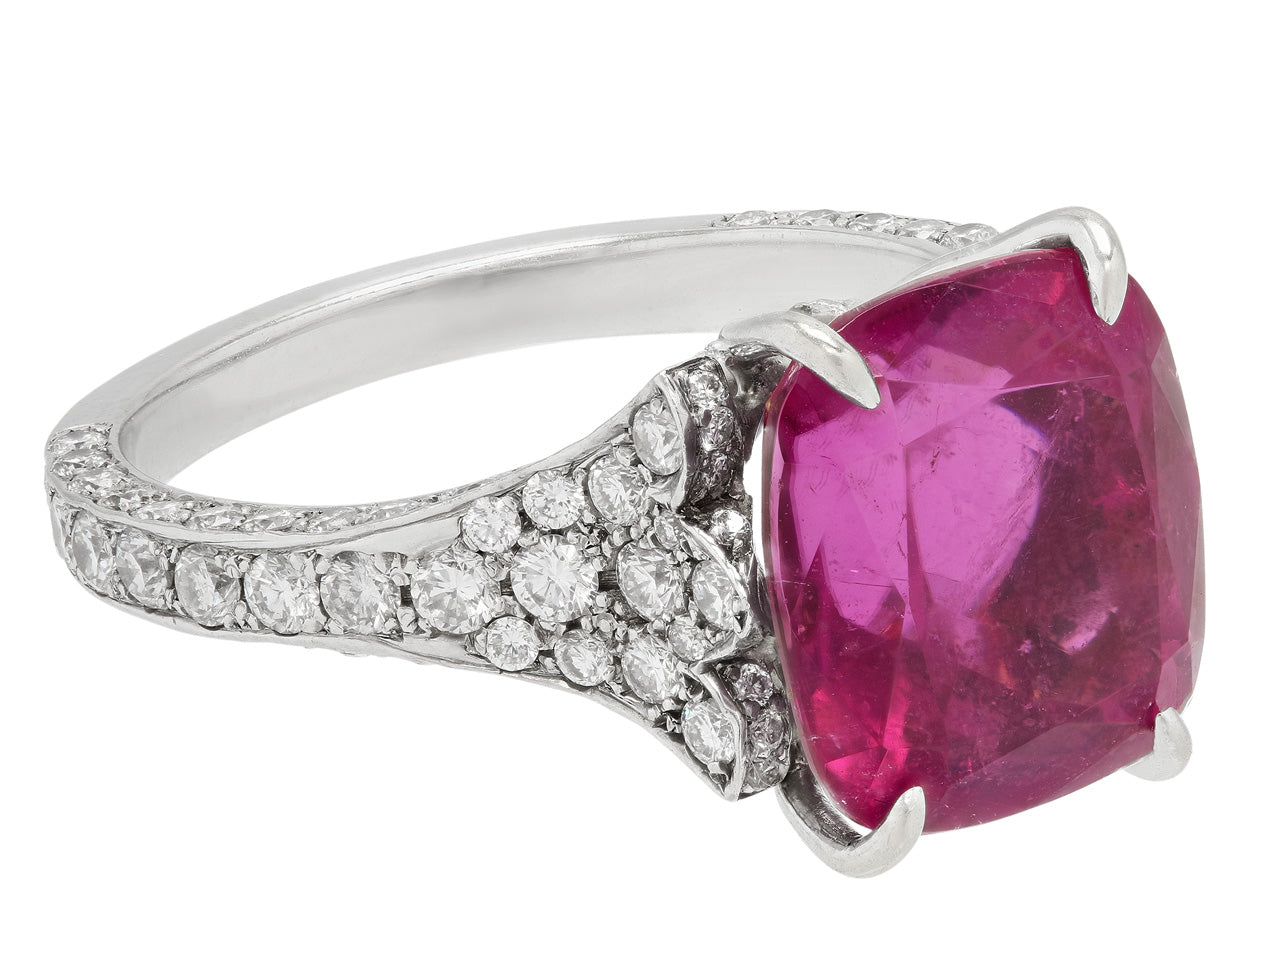 Pink Tourmaline and Diamond Ring in 14K White Gold